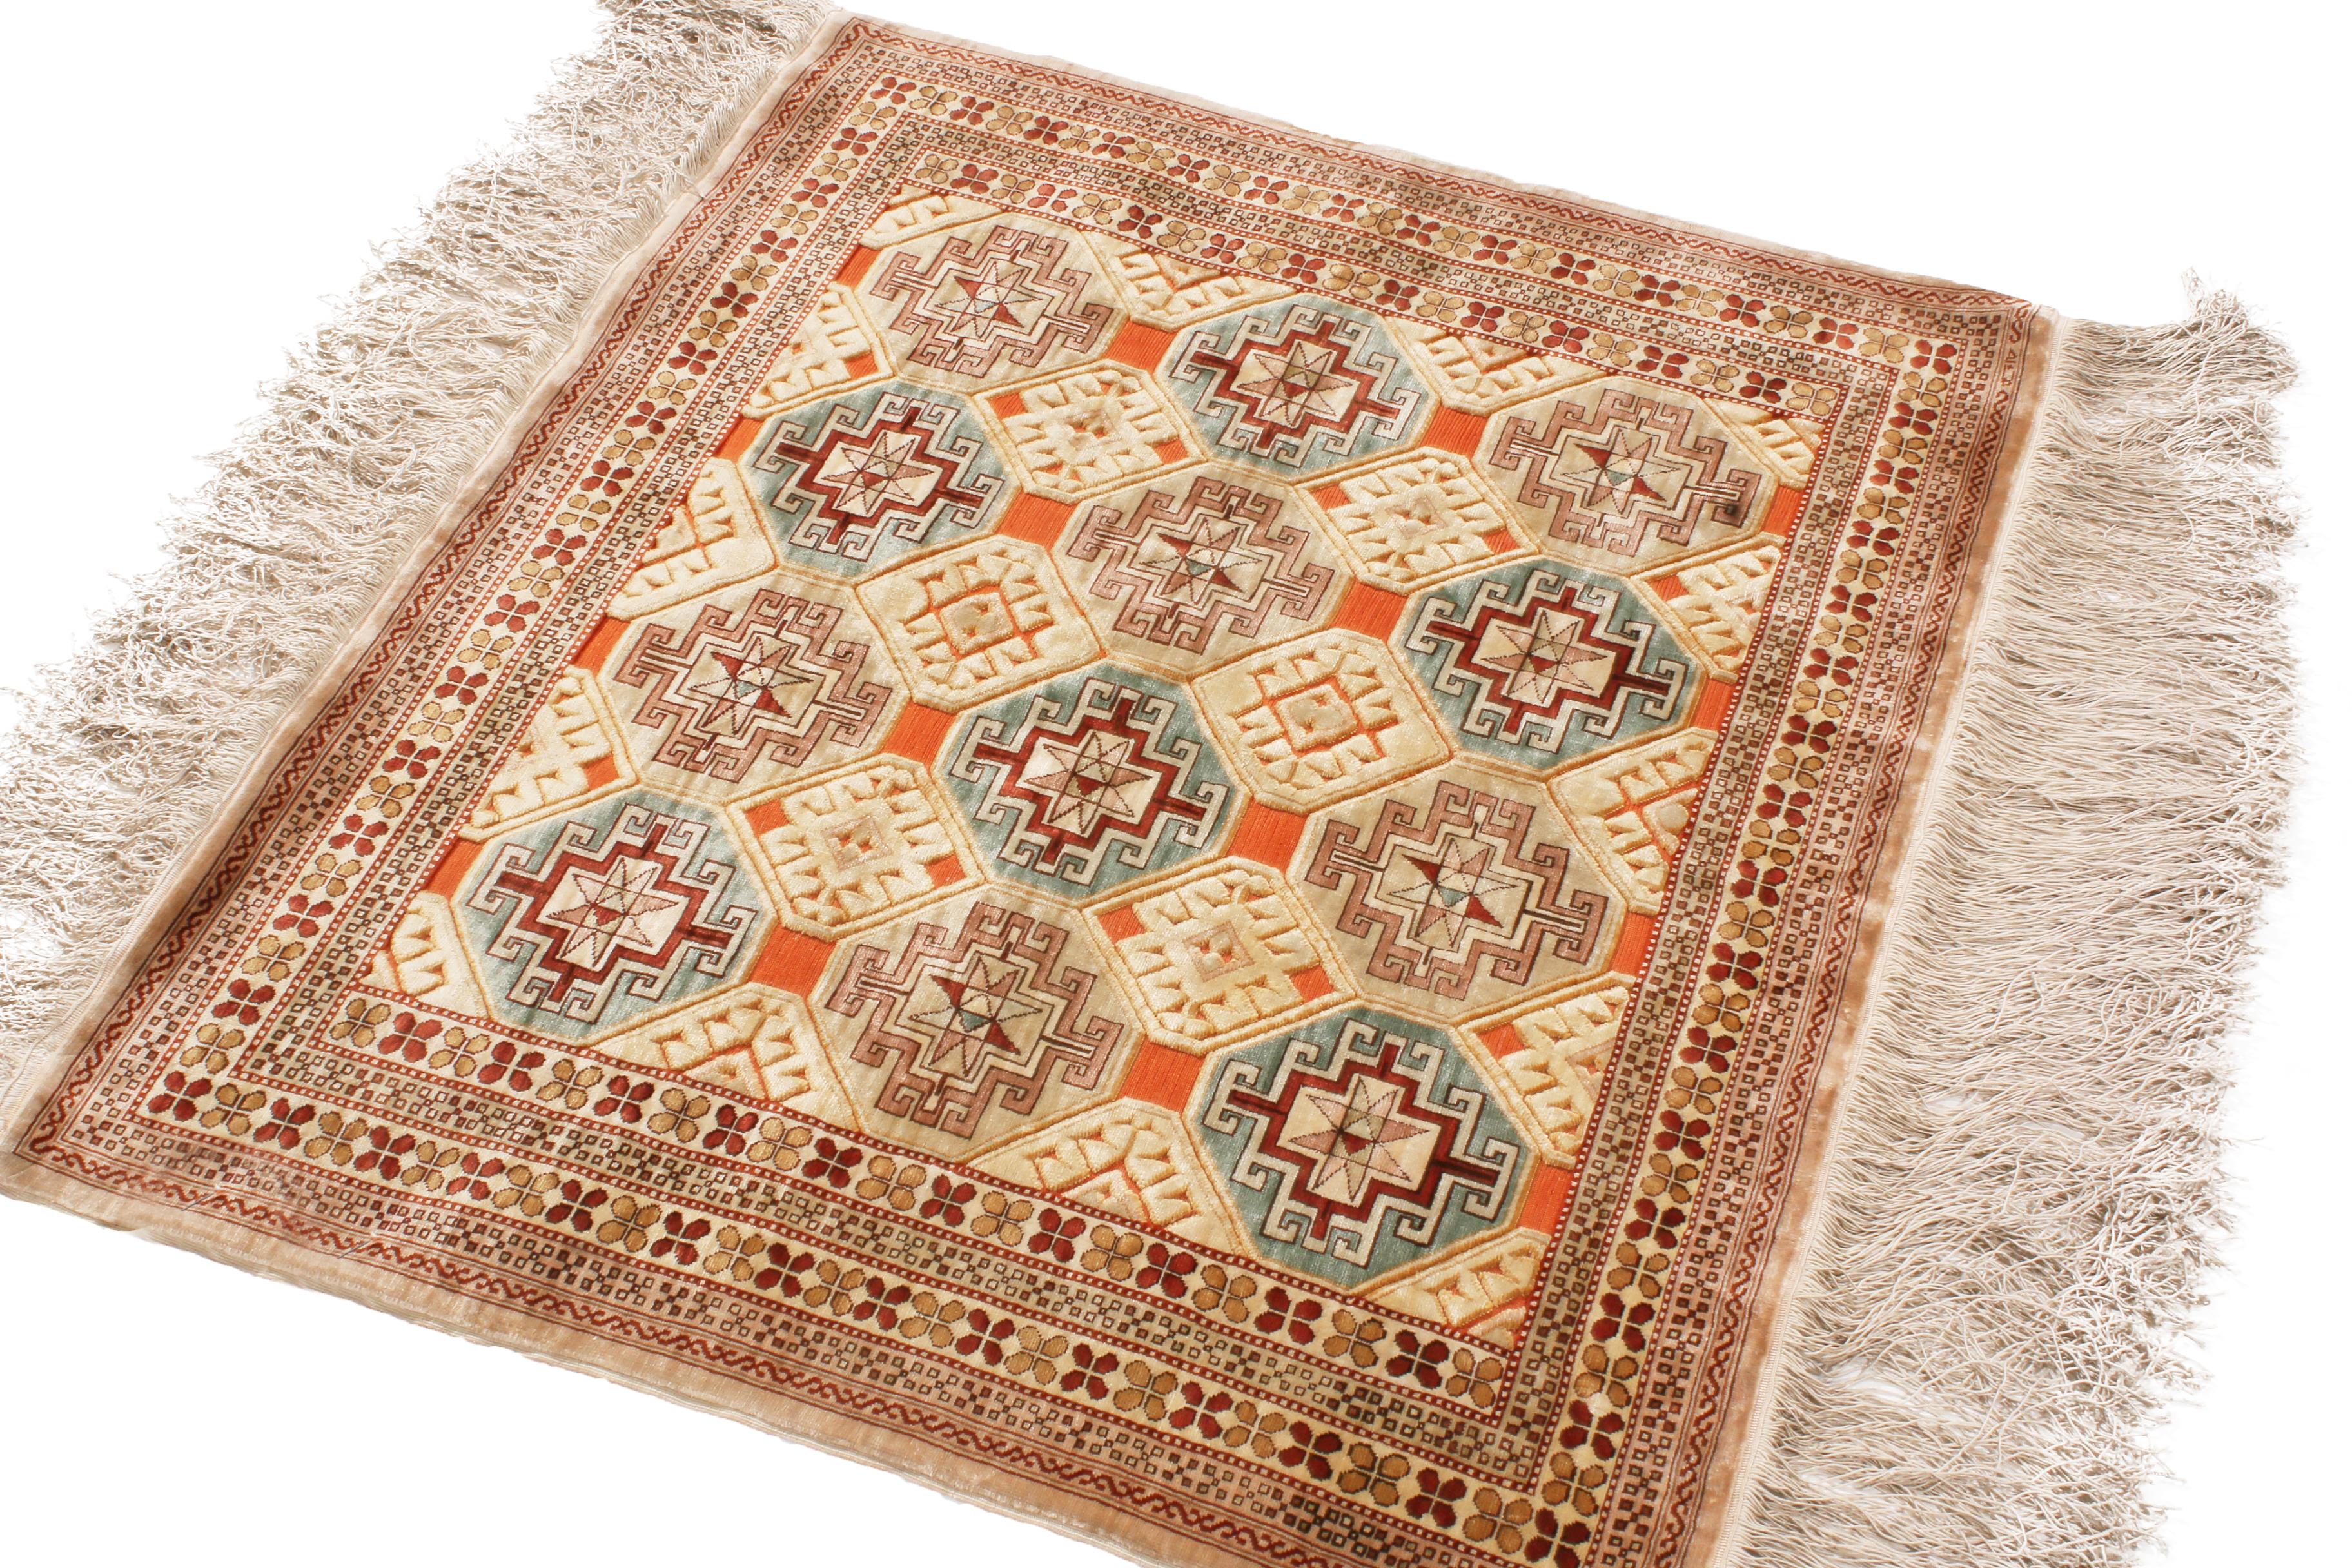 Enjoying a very tribal geometric-floral design and hand knotted, naturally luminous silk originating from Turkey in 1890, this antique Kirsehir rug is an ode to masterful symmetry in color and pattern, mirrored from the center outward in an